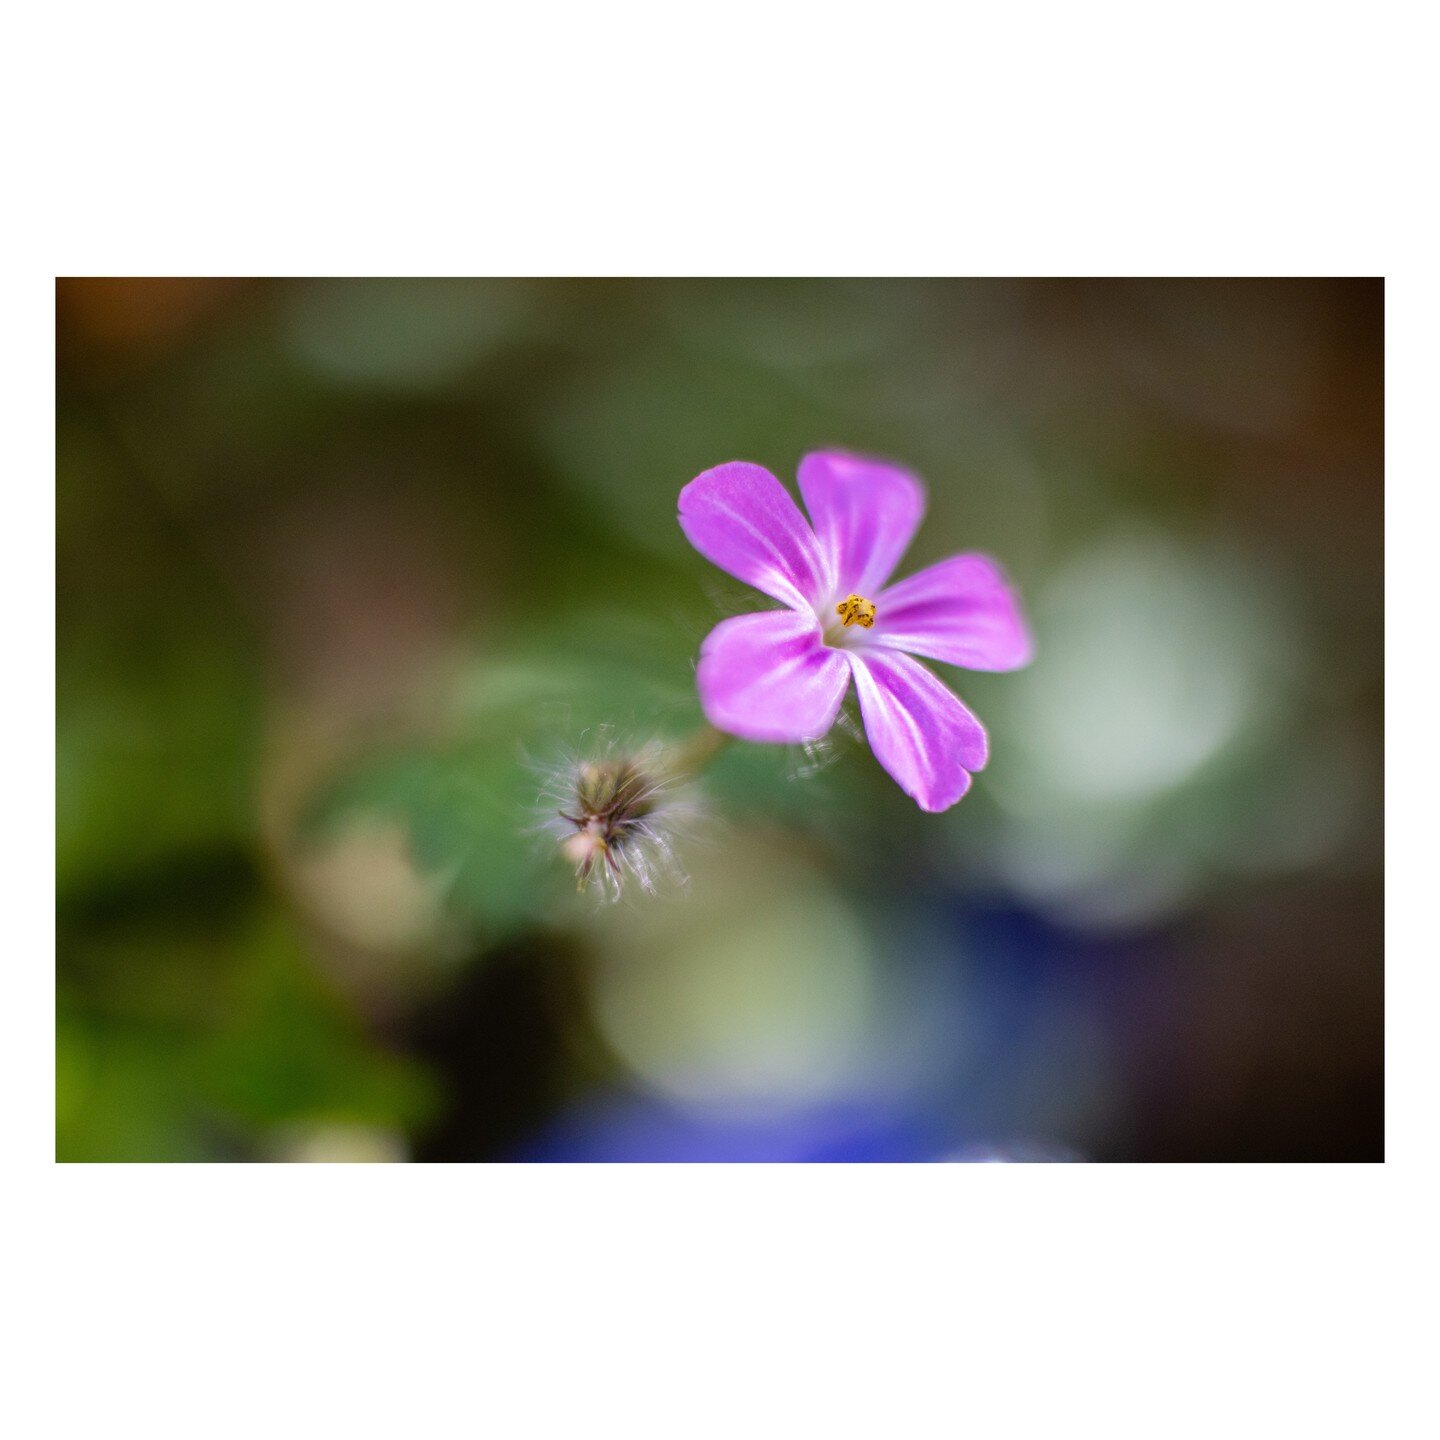 trying some macro shots of flowers in the garden, a herb robert, very close up. 120 of 365, no reason other than the joy of image making.

.
.
.
.
.
.
.
.
.
#instagramers #photodrome #photooftheday #picoftheday #alemy #art #bestoftheday #beautiful #h